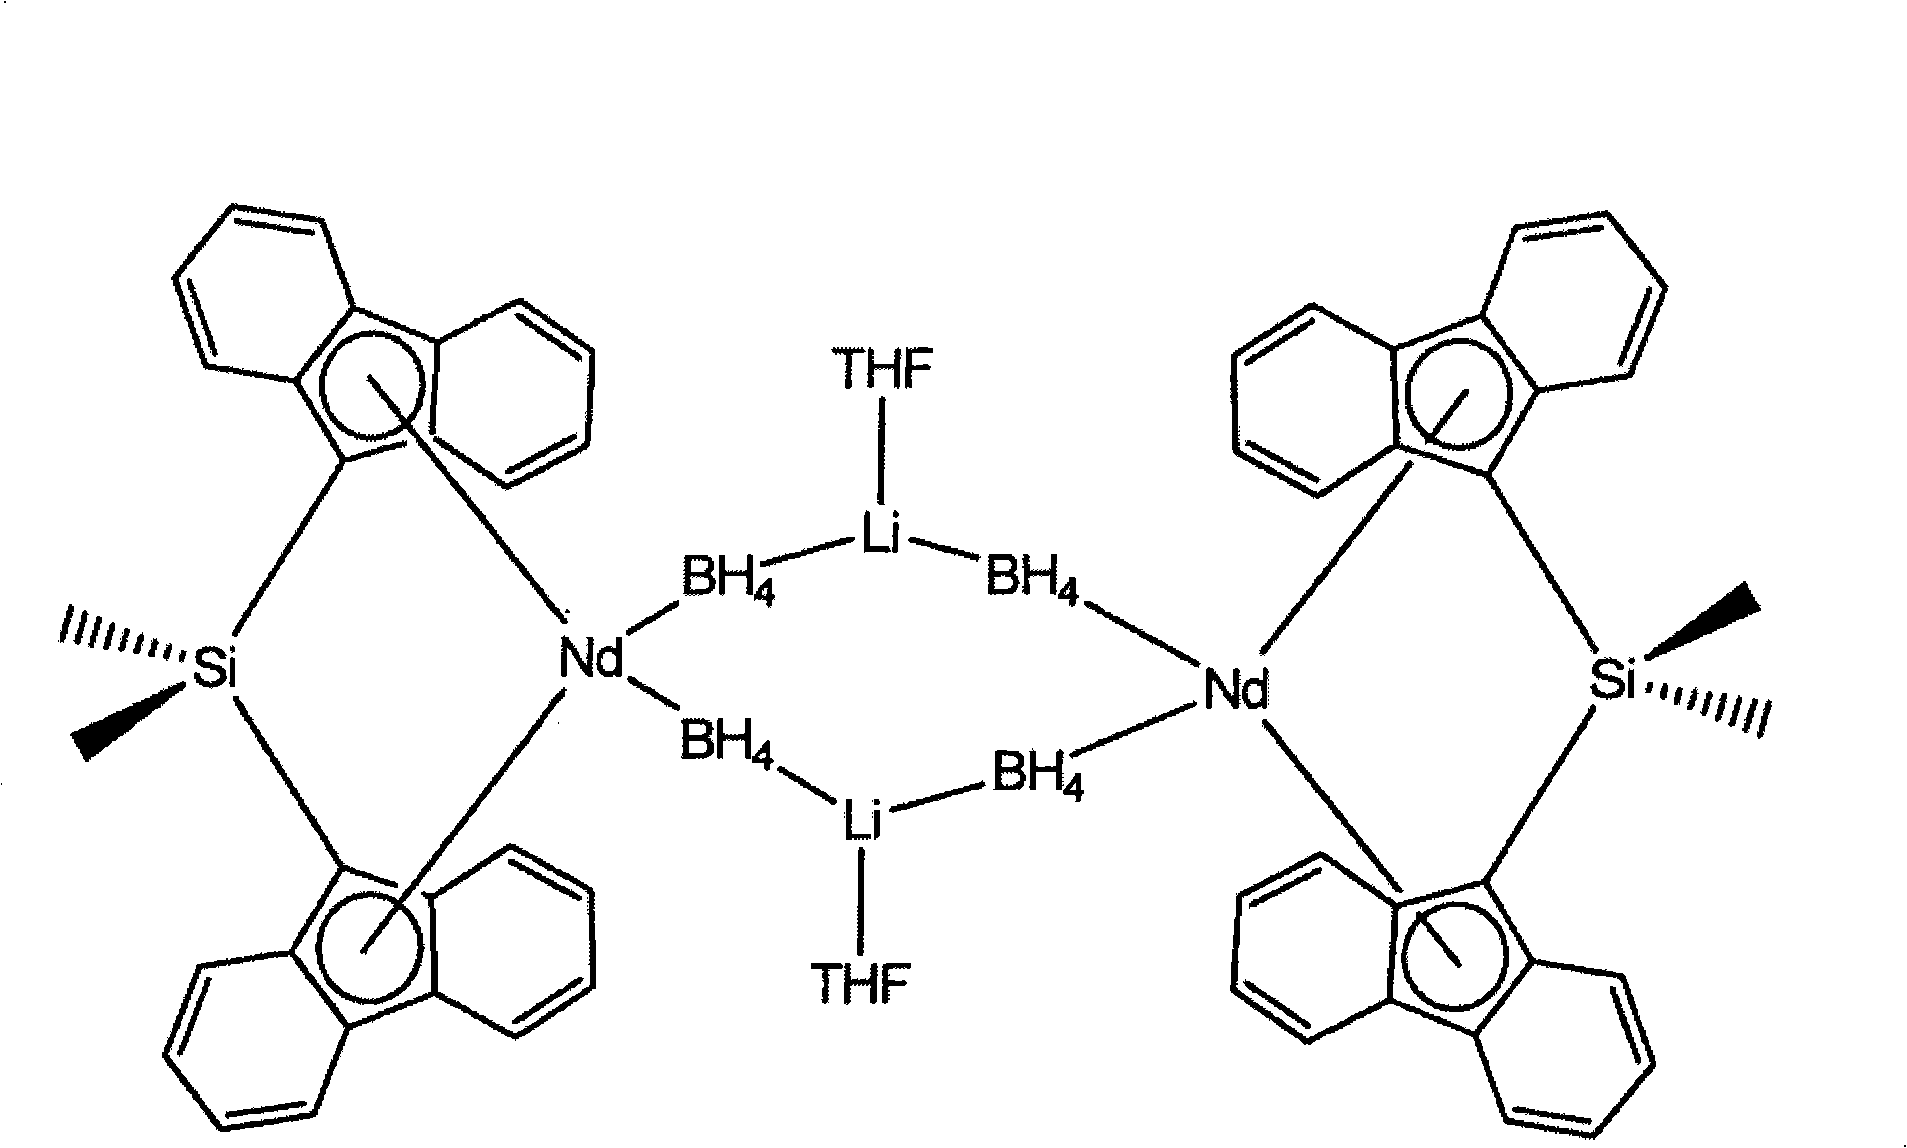 Borohydride metallocene complex of a lanthanide, catalytic system including said complex, polymerization method using same and ethylene/butadiene copolymer obtained using said method